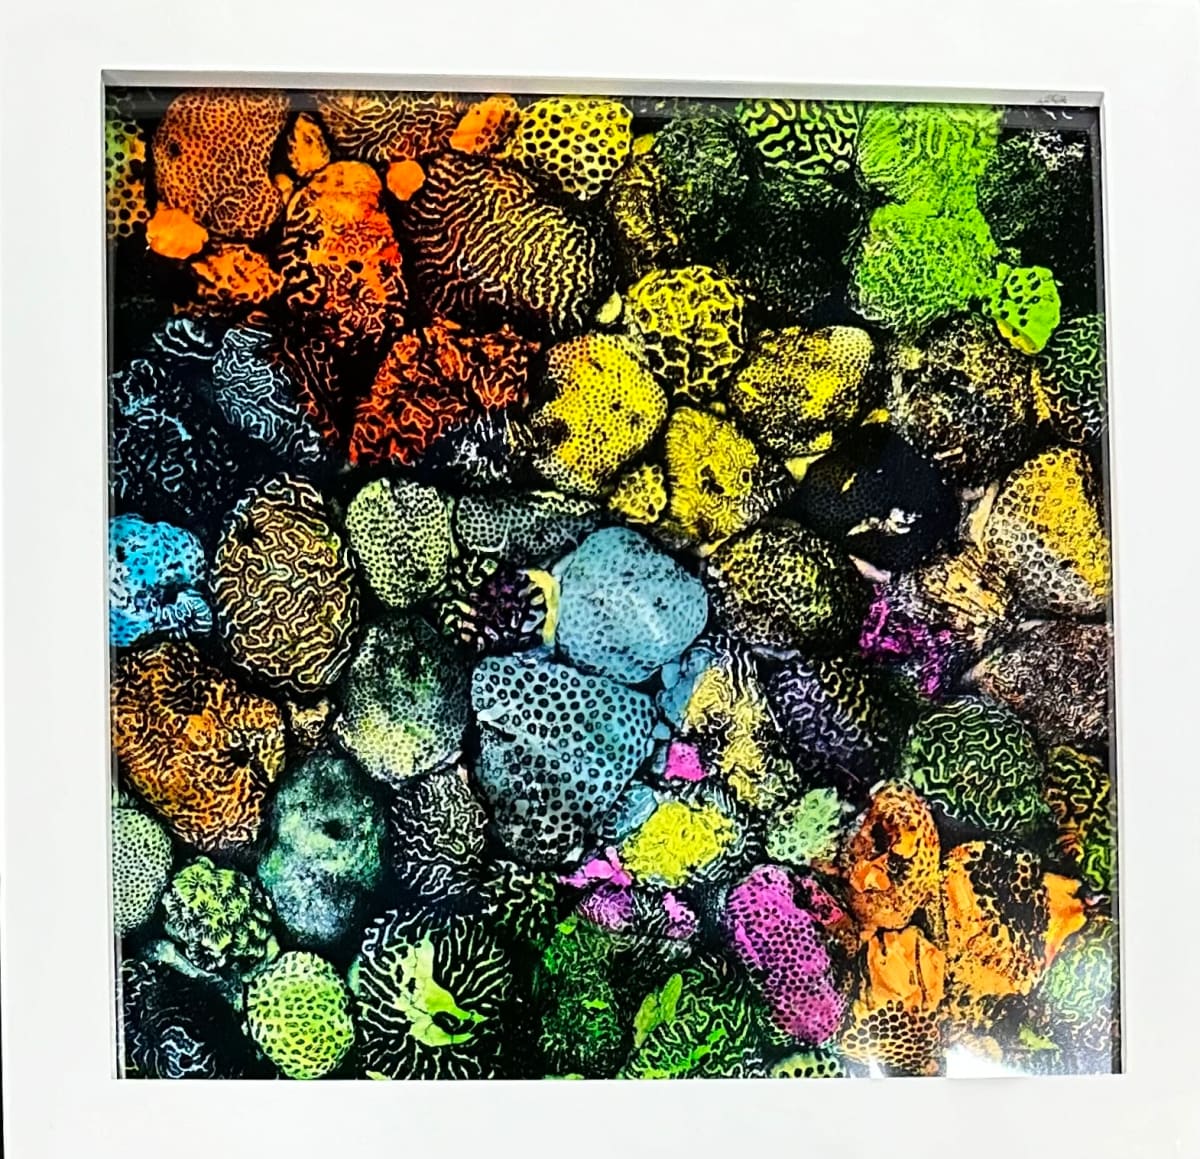 Coral in Living Color 1 (framed) by Bonnie Levinson 